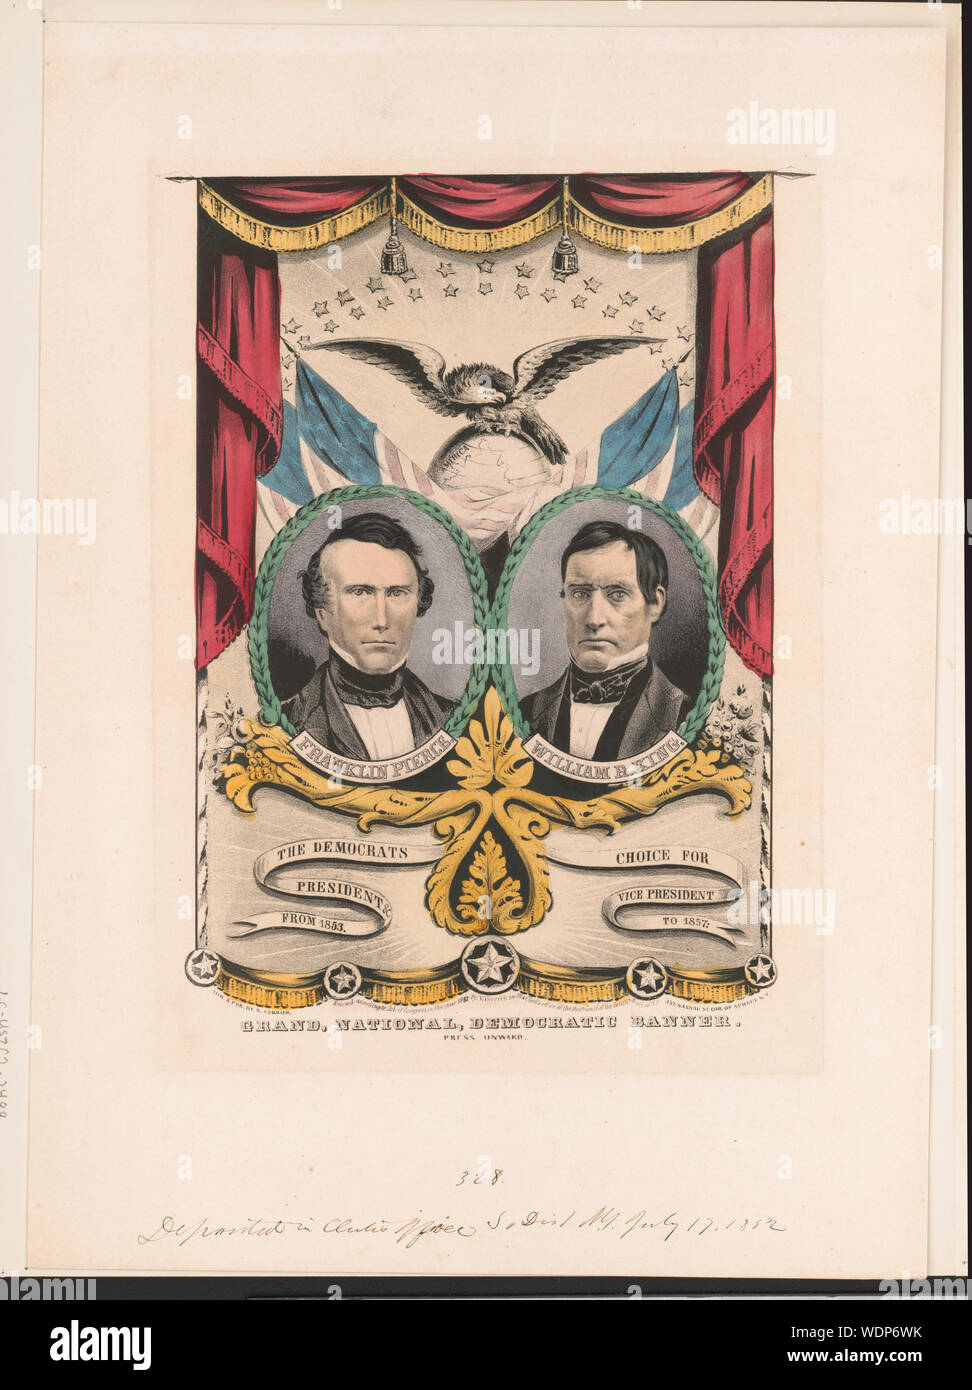 Grand, national, democratic banner - press onward / lith. & pub. by N. Currier. Abstract: 1 print : lithograph, hand-colored  29.7 x 23.3 cm (image), 44.3 x 32 cm (sheet) Stock Photo